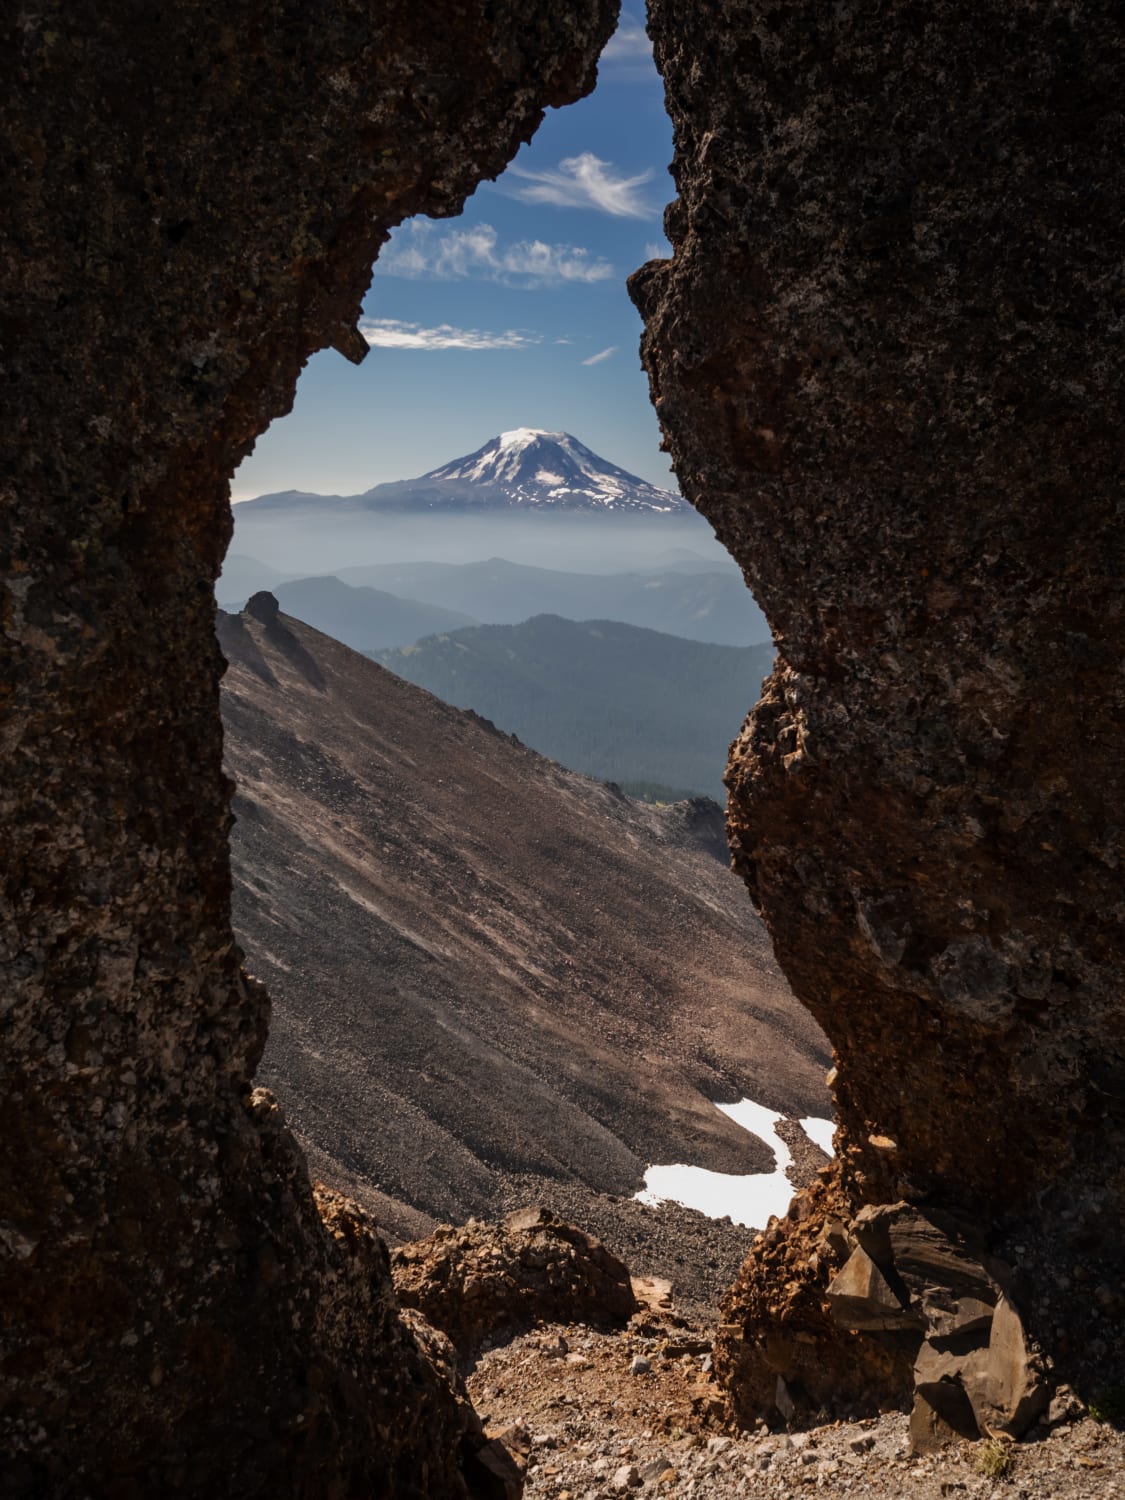 Looking out at Mount Adams from the Goat Rocks Wilderness Area, WA. - @TallCupOfChocolateMilk